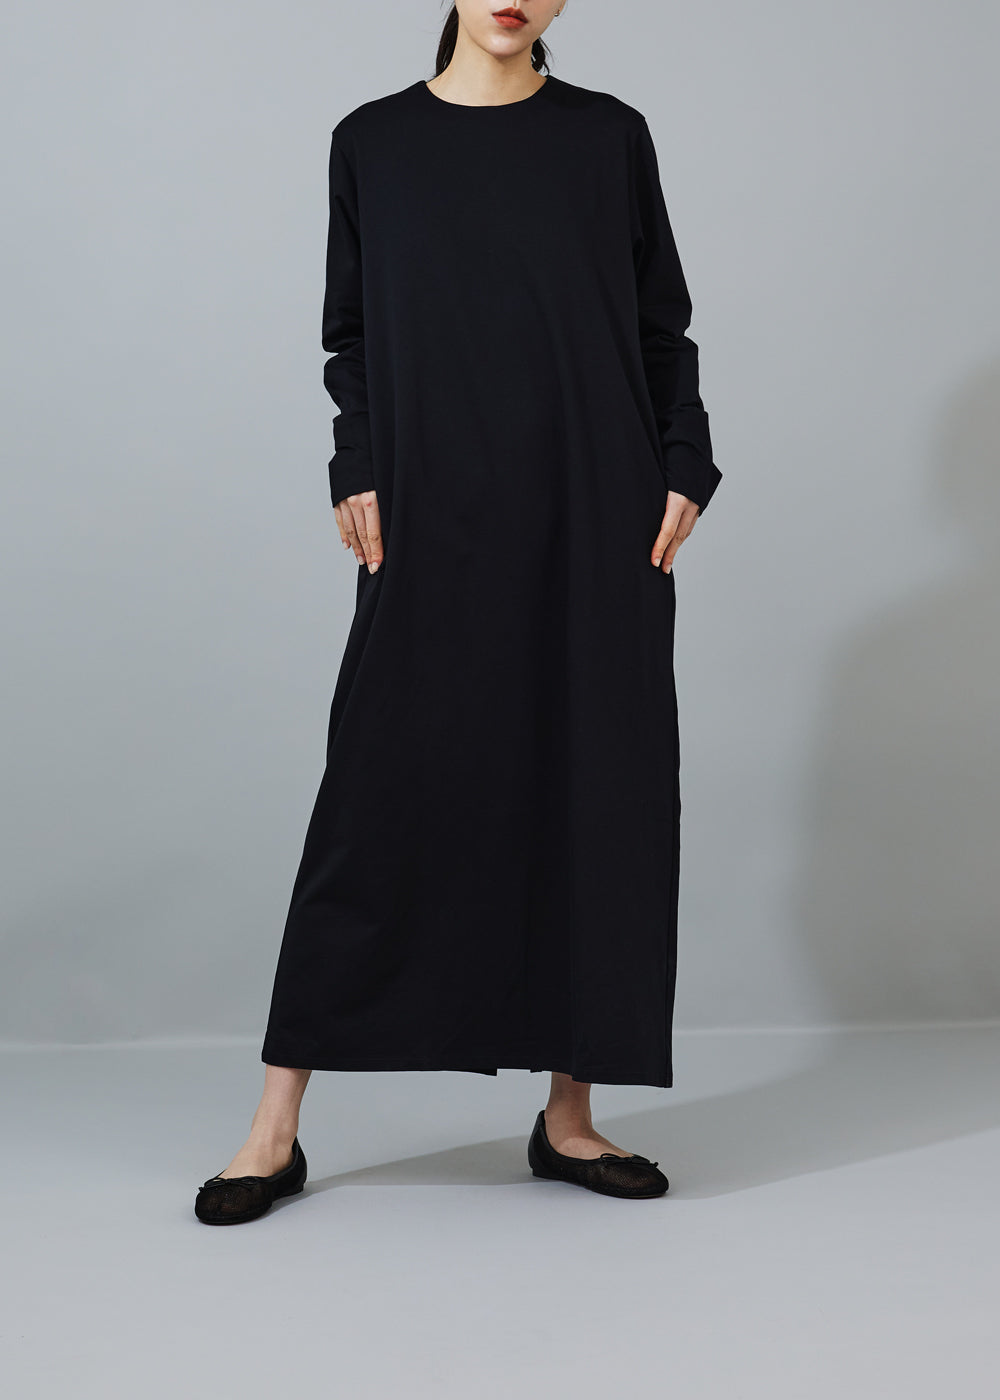 SY019OP / Boxy Line Long Dress BLACK【翁安芸さん×SYNE TOKYO】 – SYNE TOKYO ONLINE  STORE